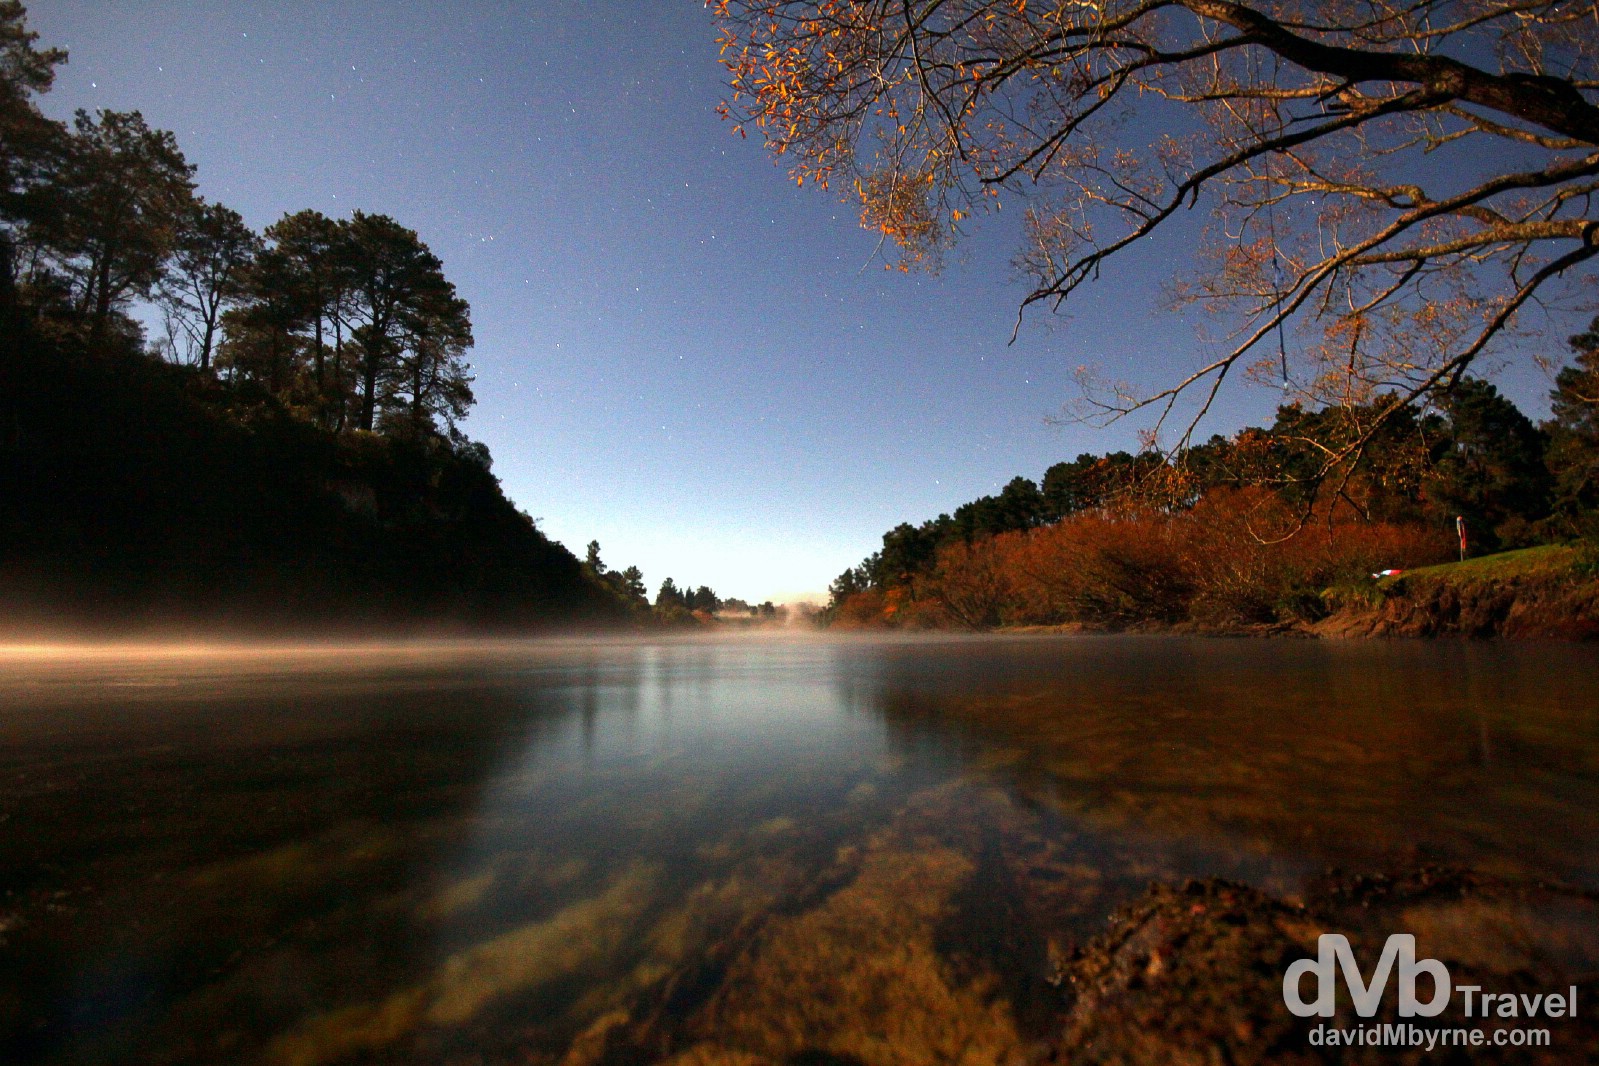 An extended exposure picture of the Waikato River, Taupo, North Island, New Zealand. May 6th 2012.